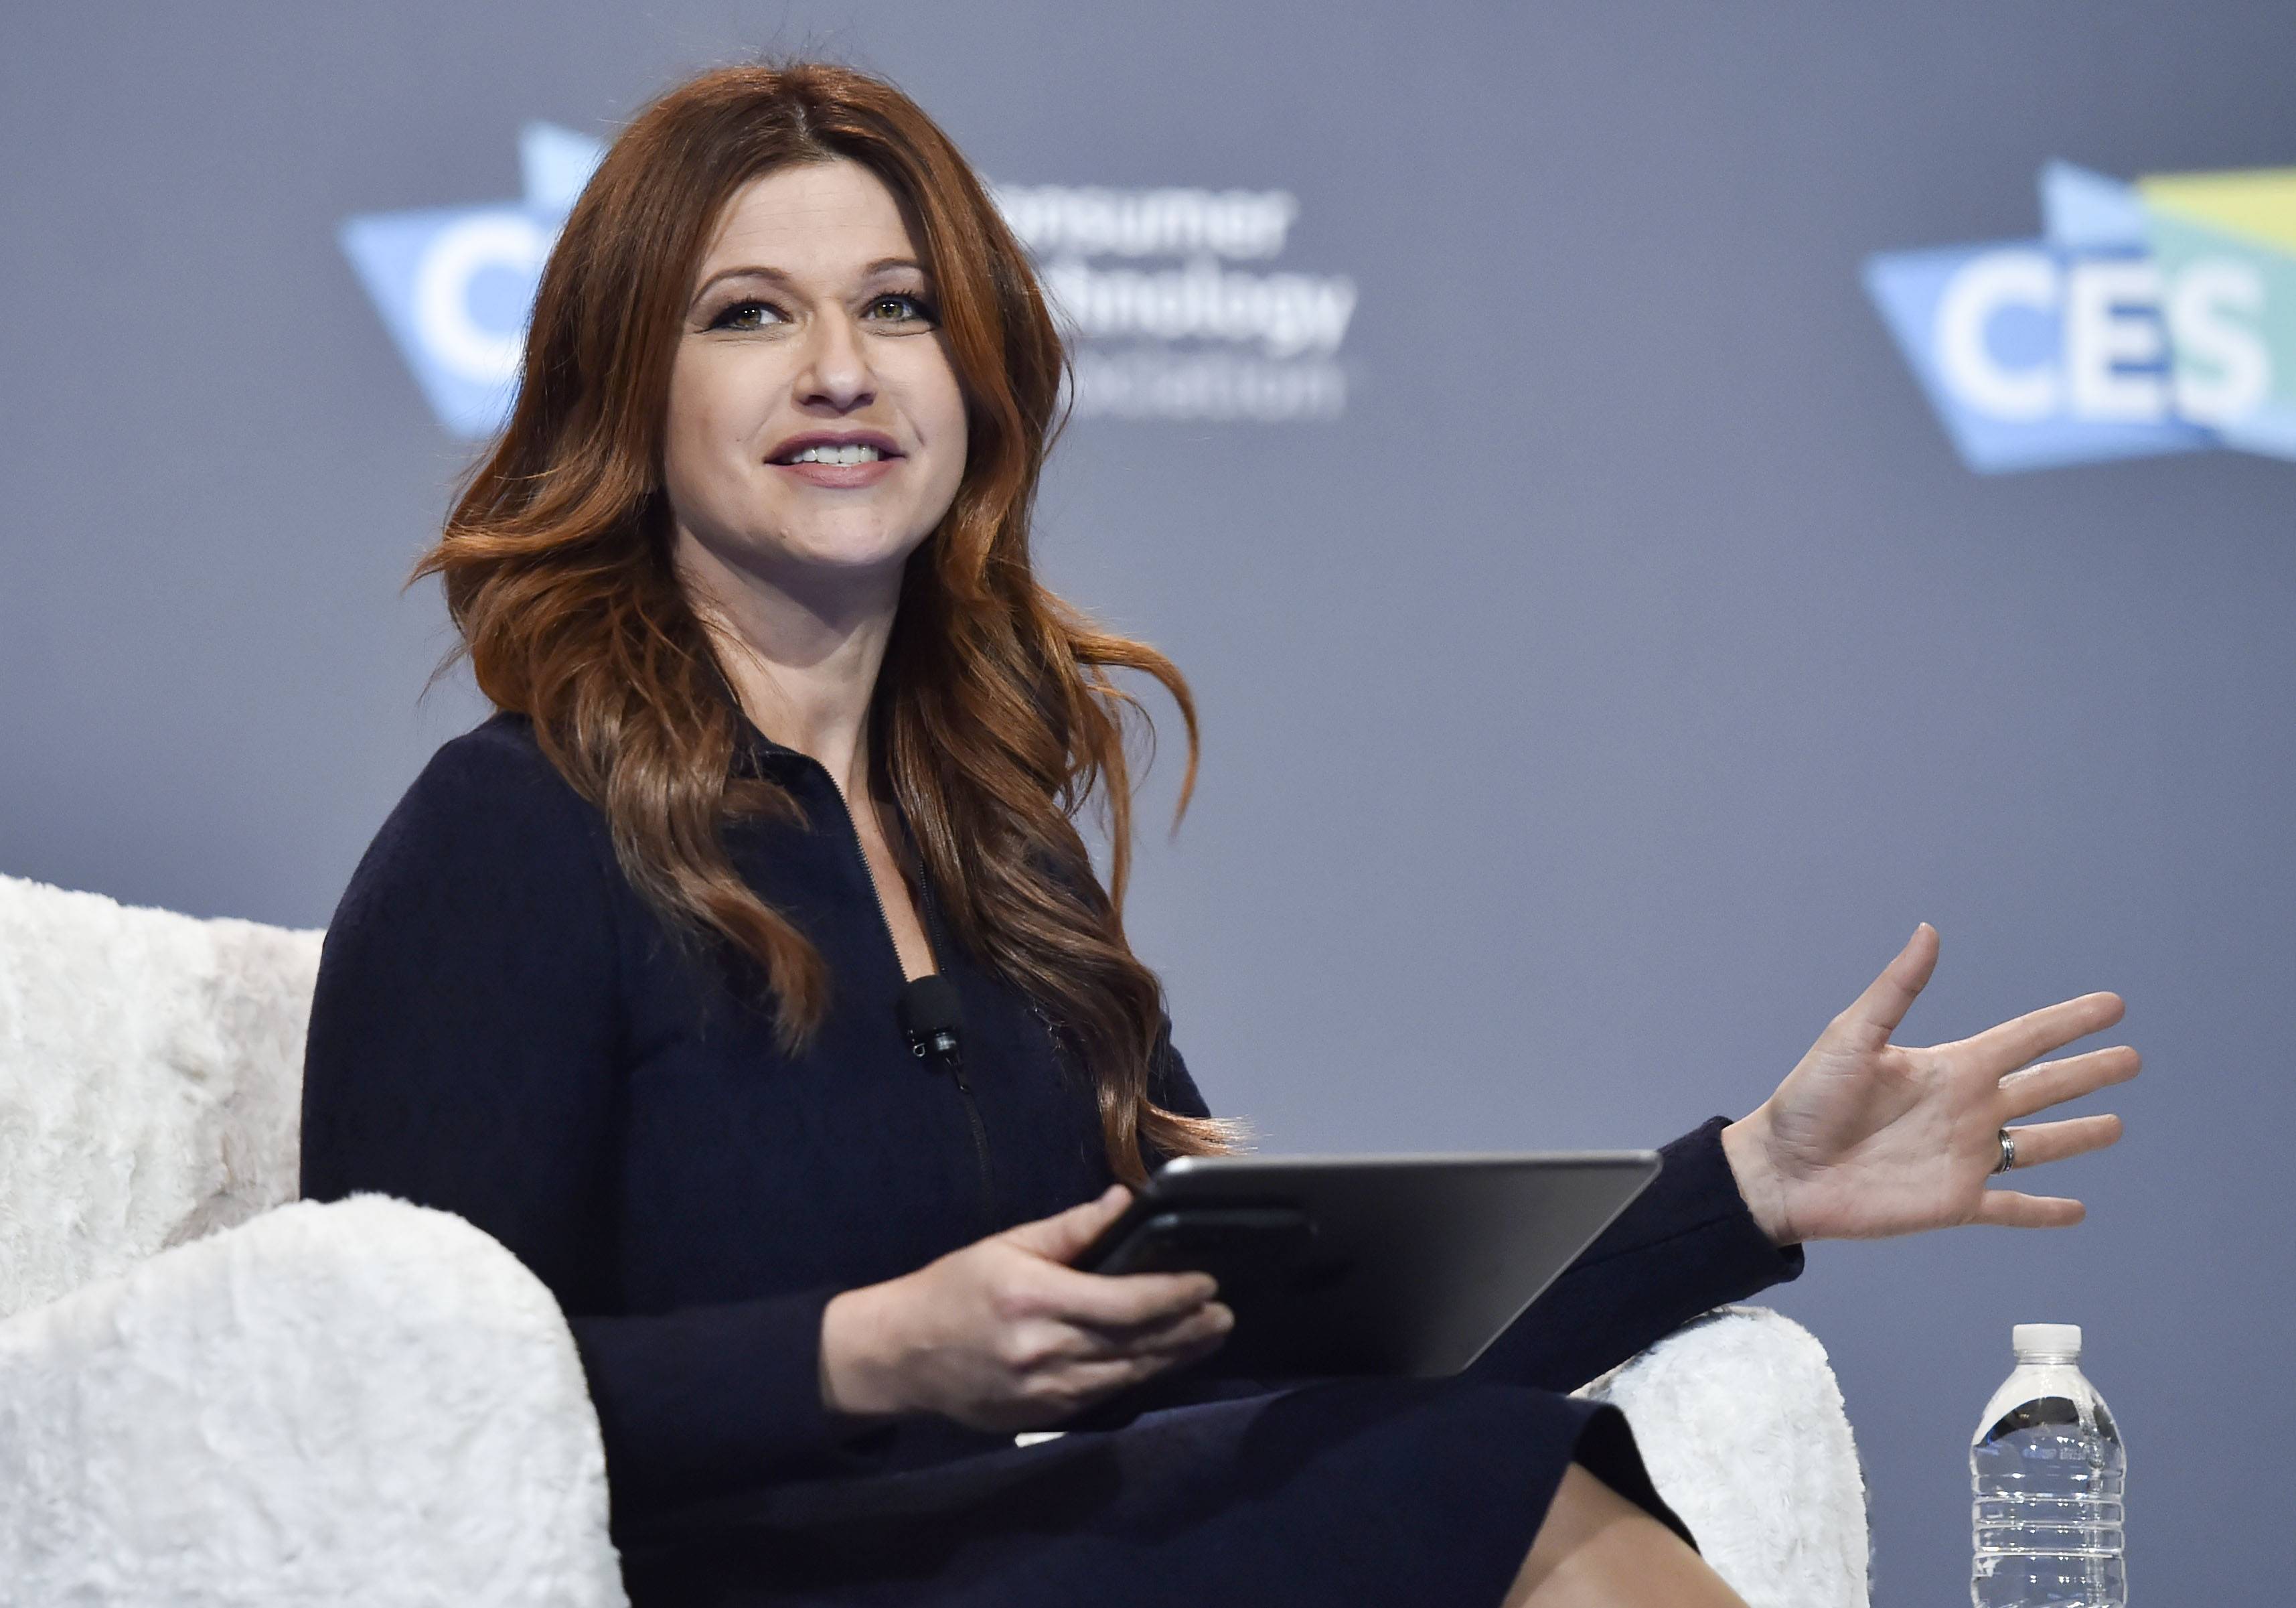 LAS VEGAS, NEVADA - JANUARY 09:  ESPN television host/moderator Rachel Nichols speaks during a press event at CES 2019 at the Aria Resort & Casino on January 9, 2019 in Las Vegas, Nevada. CES, the world's largest annual consumer technology trade show, runs through January 11 and features about 4,500 exhibitors showing off their latest products and services to more than 180,000 attendees.  (Photo by David Becker/Getty Images)